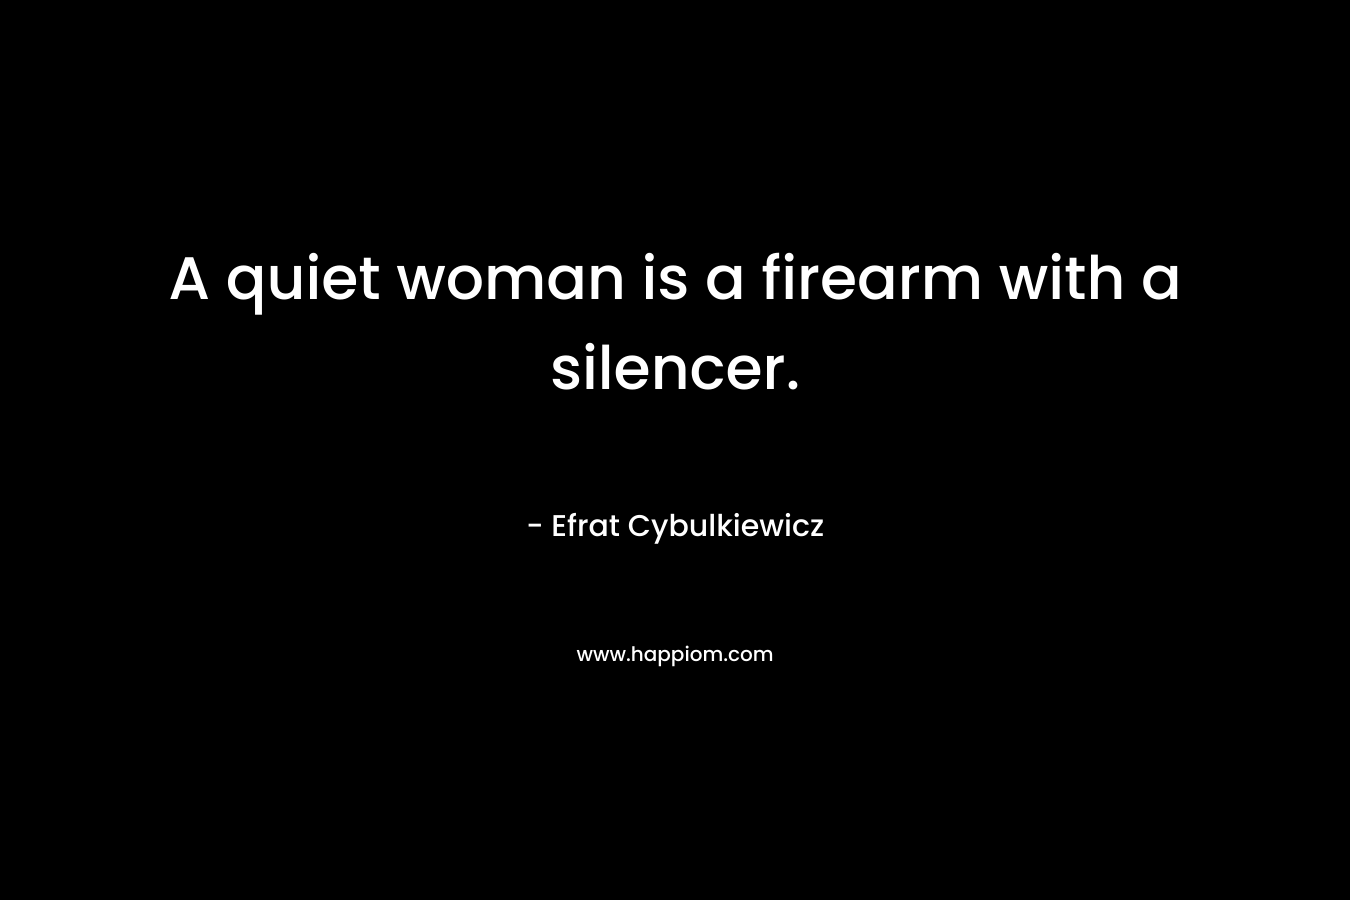 A quiet woman is a firearm with a silencer.